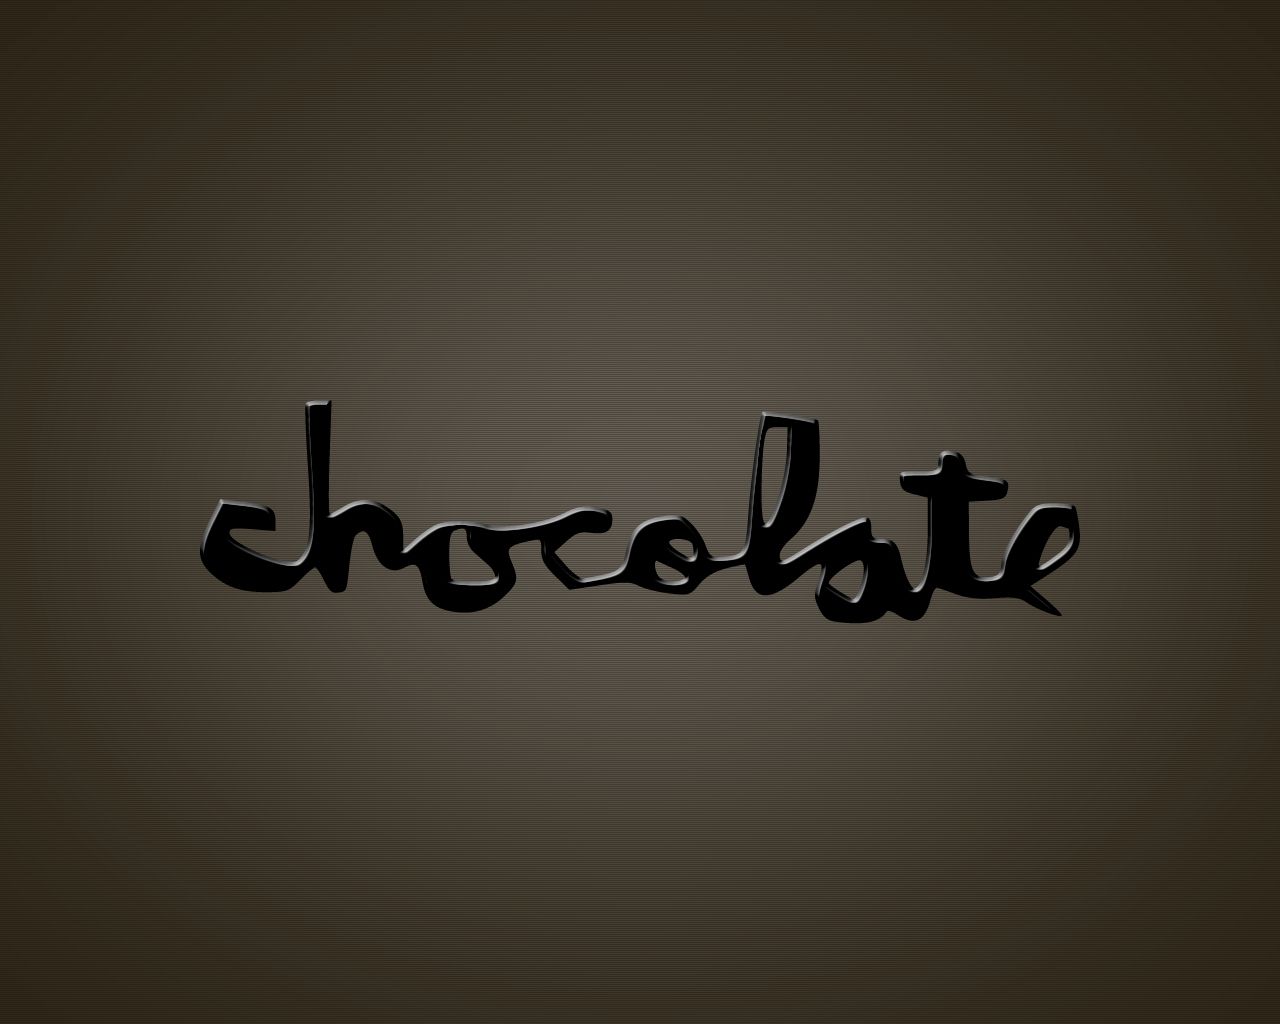 Chocolate Pictures, Images and Photos